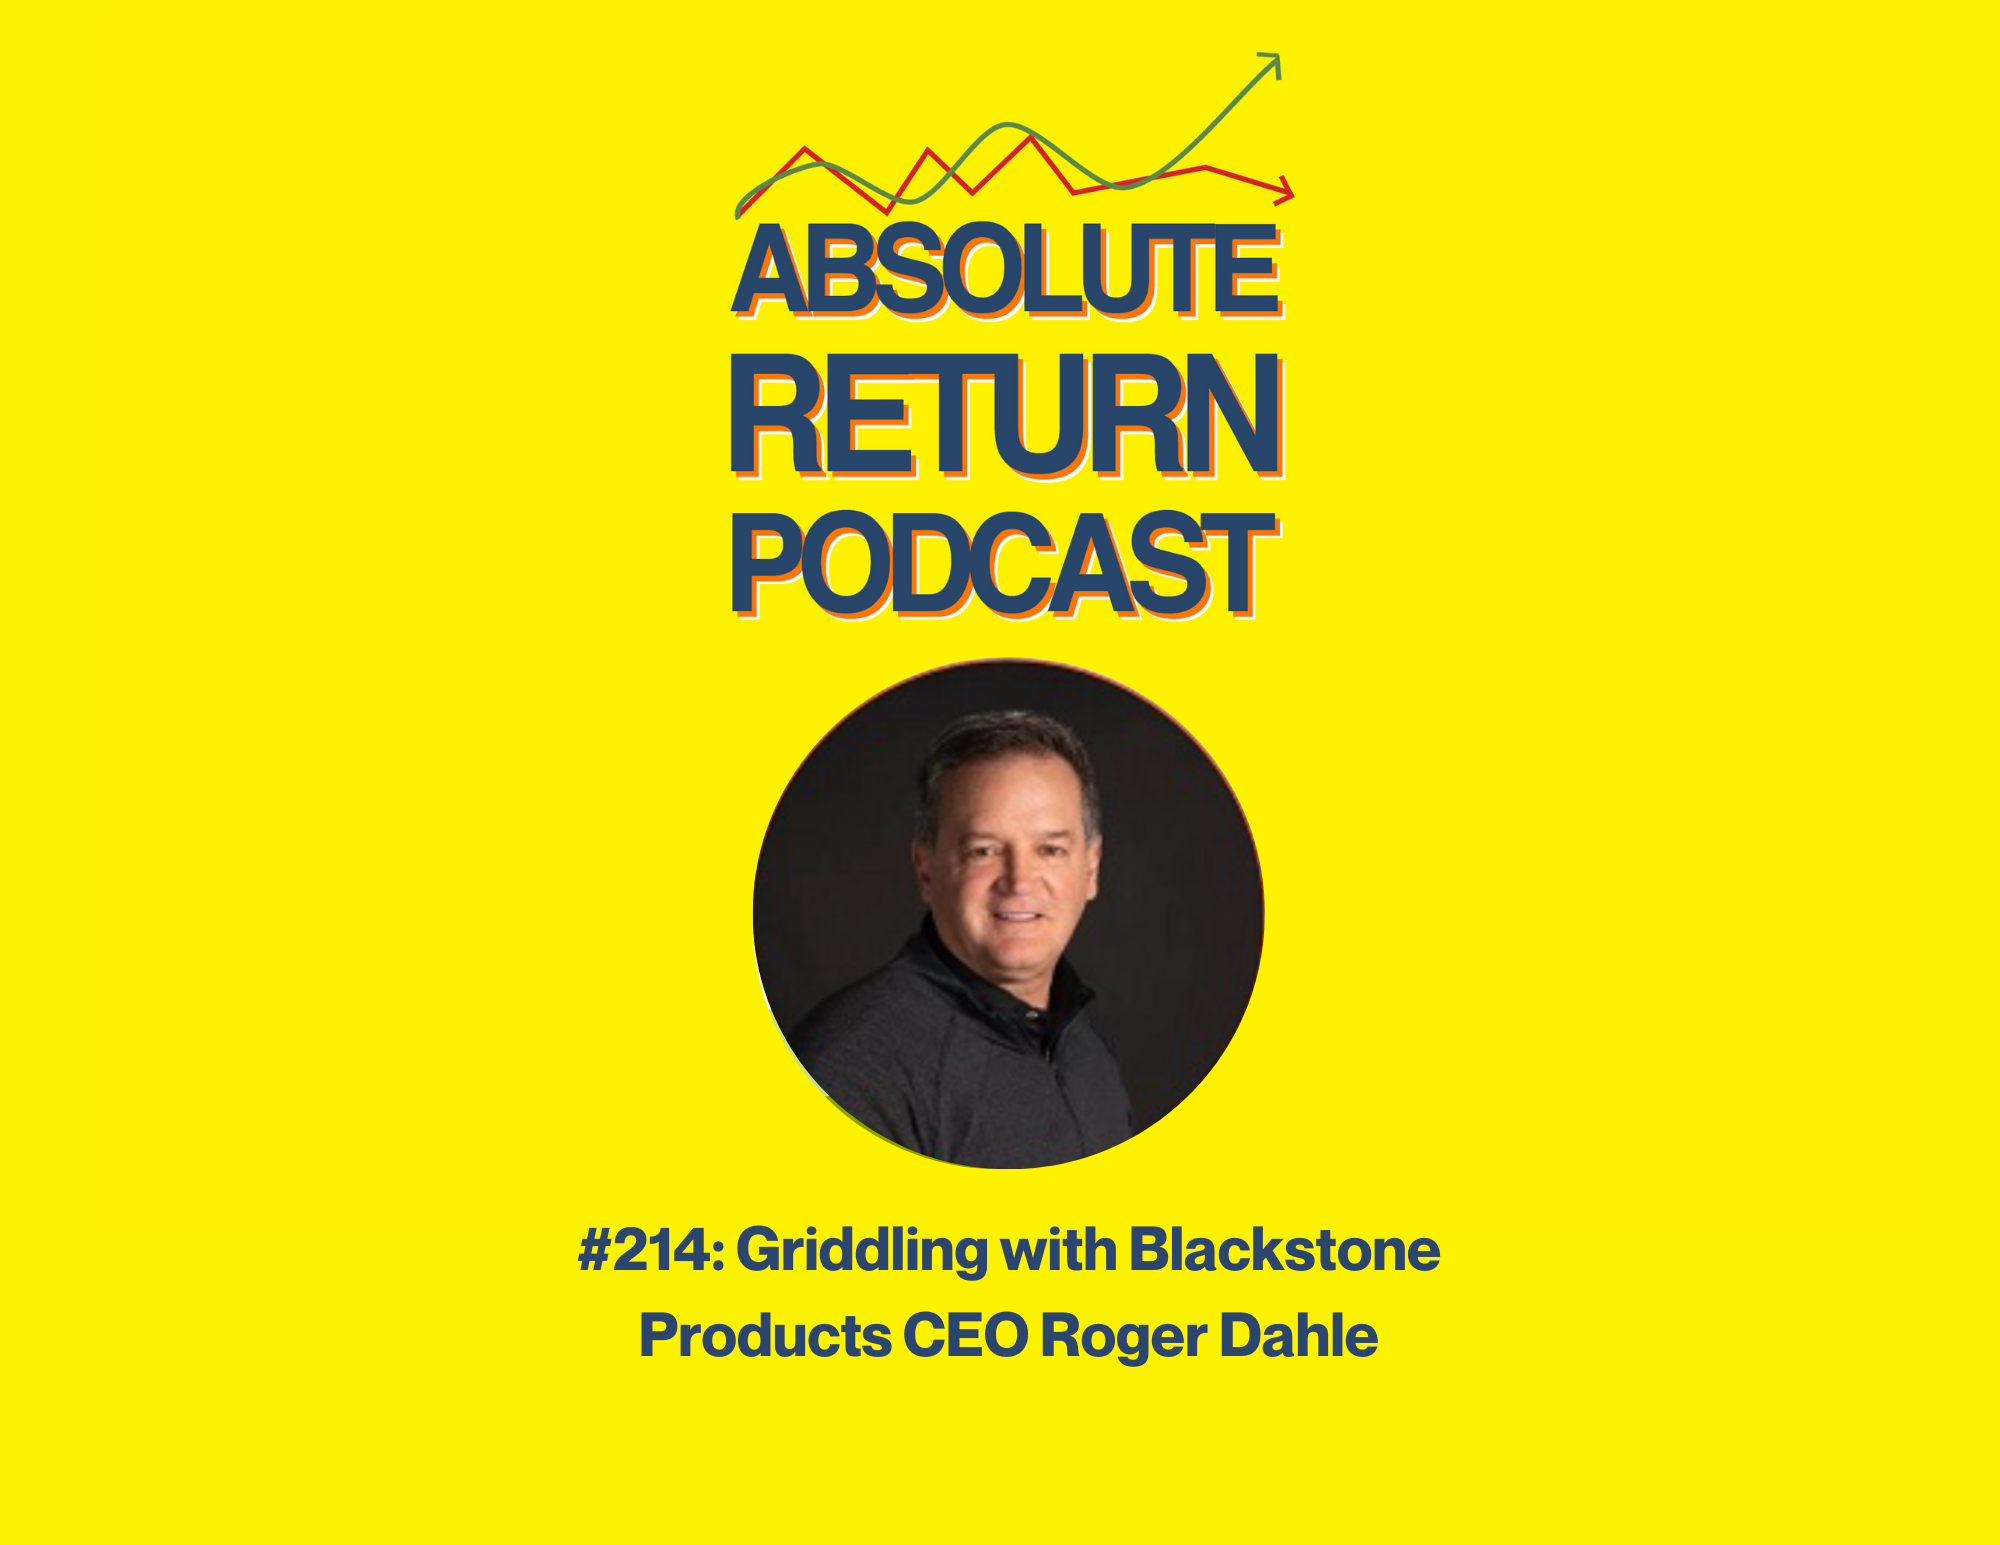 Absolute Return Podcast #214: Griddling with Blackstone Products CEO Roger Dahle